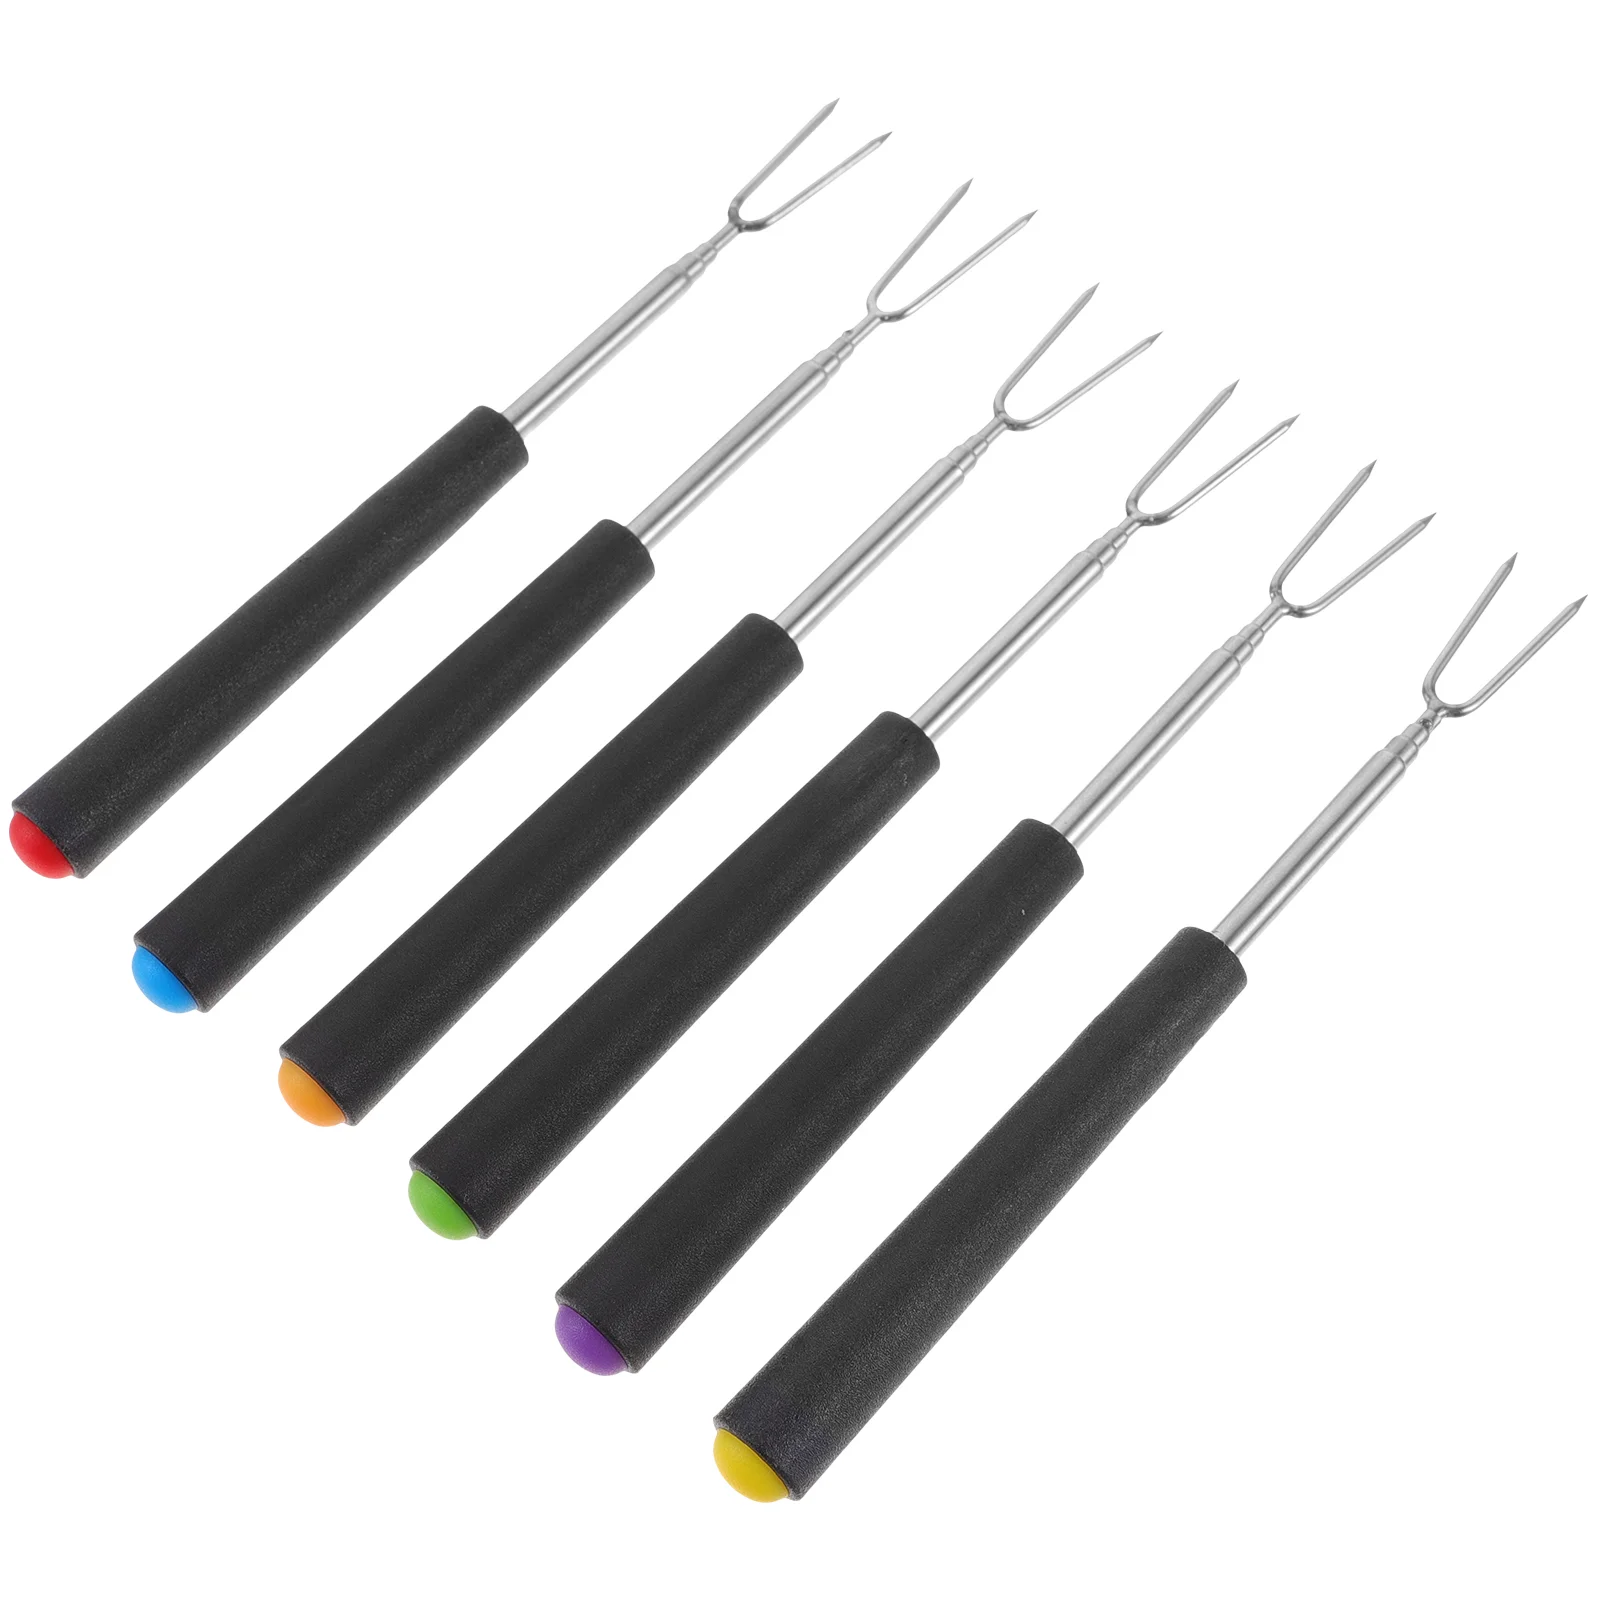 

6 Pcs Telescopic Barbecue Fork Cooking Meat Forks Roasting Supplies Sticks Grill Outdoor Tool Skewers Marshmallow Set